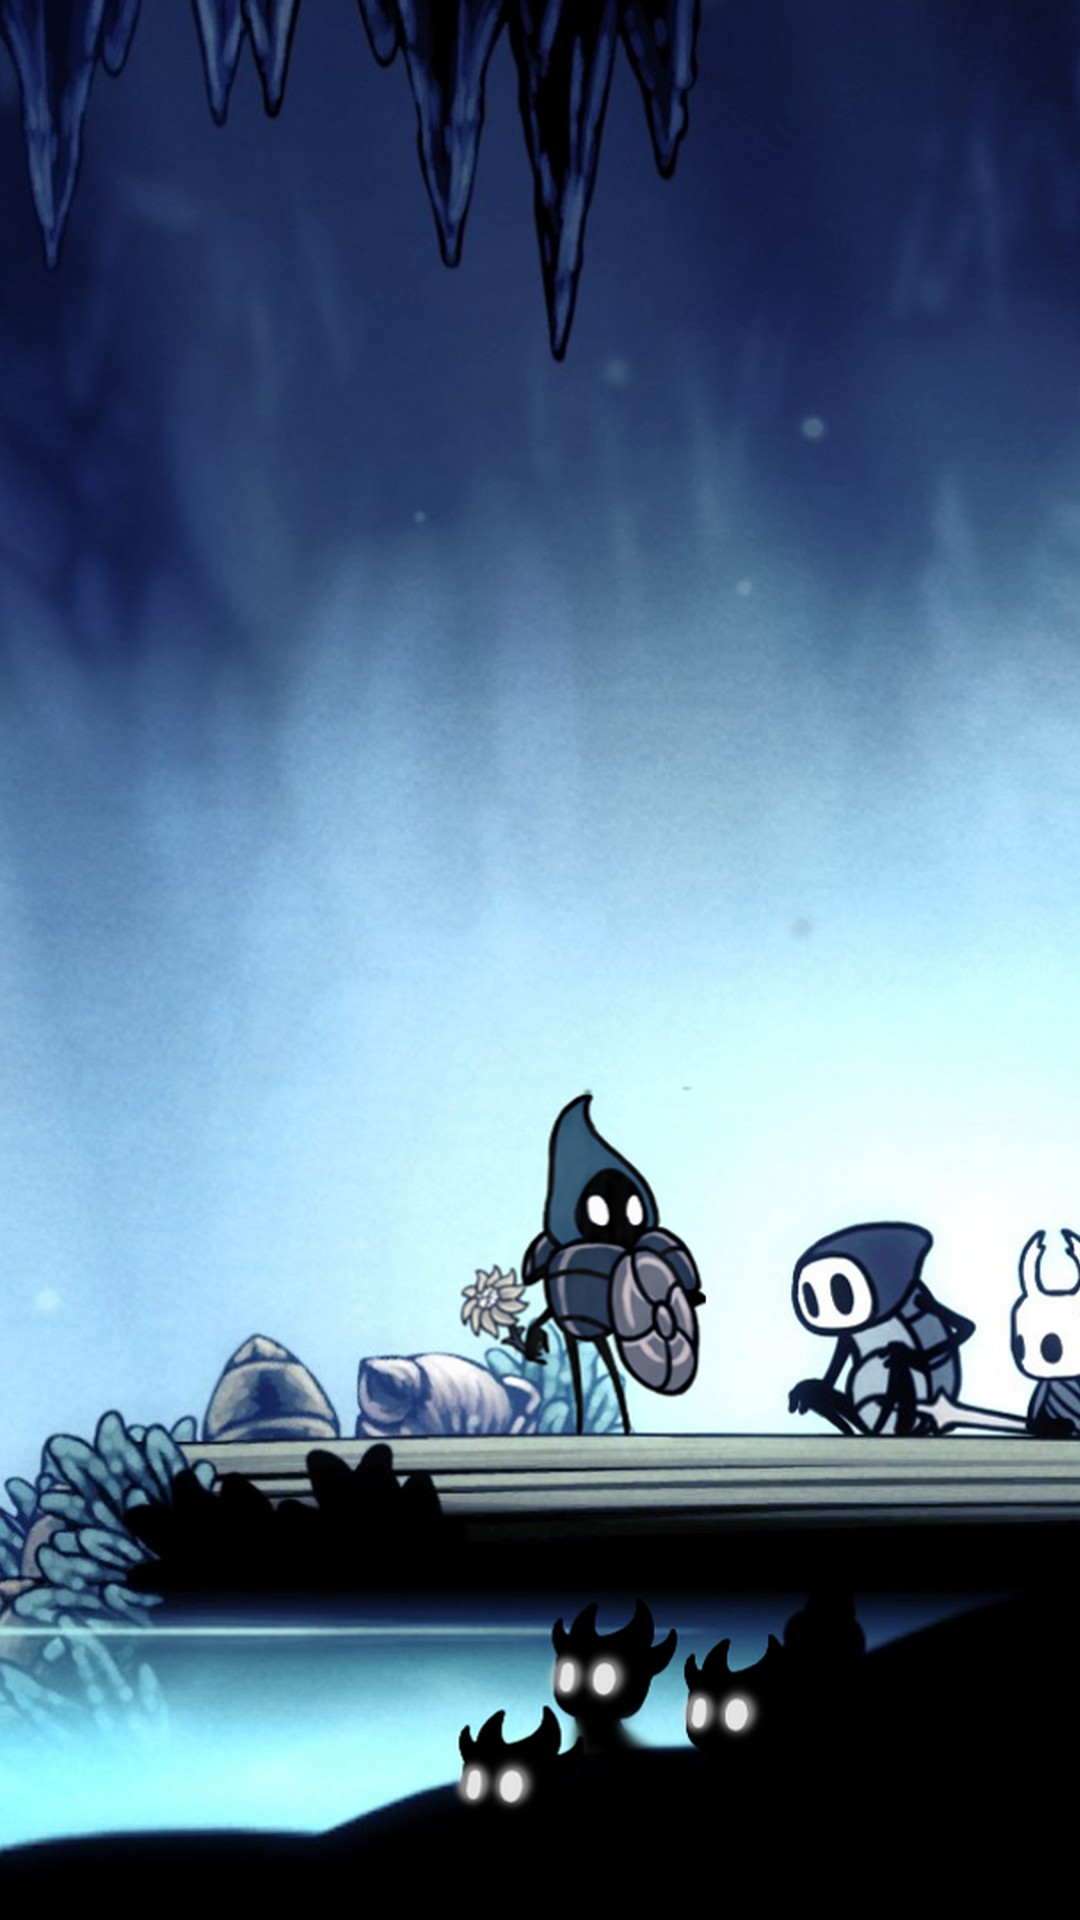 Android Wallpaper Hollow Knight Gameplay with high-resolution 1080x1920 pixel. You can use this wallpaper for your Android backgrounds, Tablet, Samsung Screensavers, Mobile Phone Lock Screen and another Smartphones device